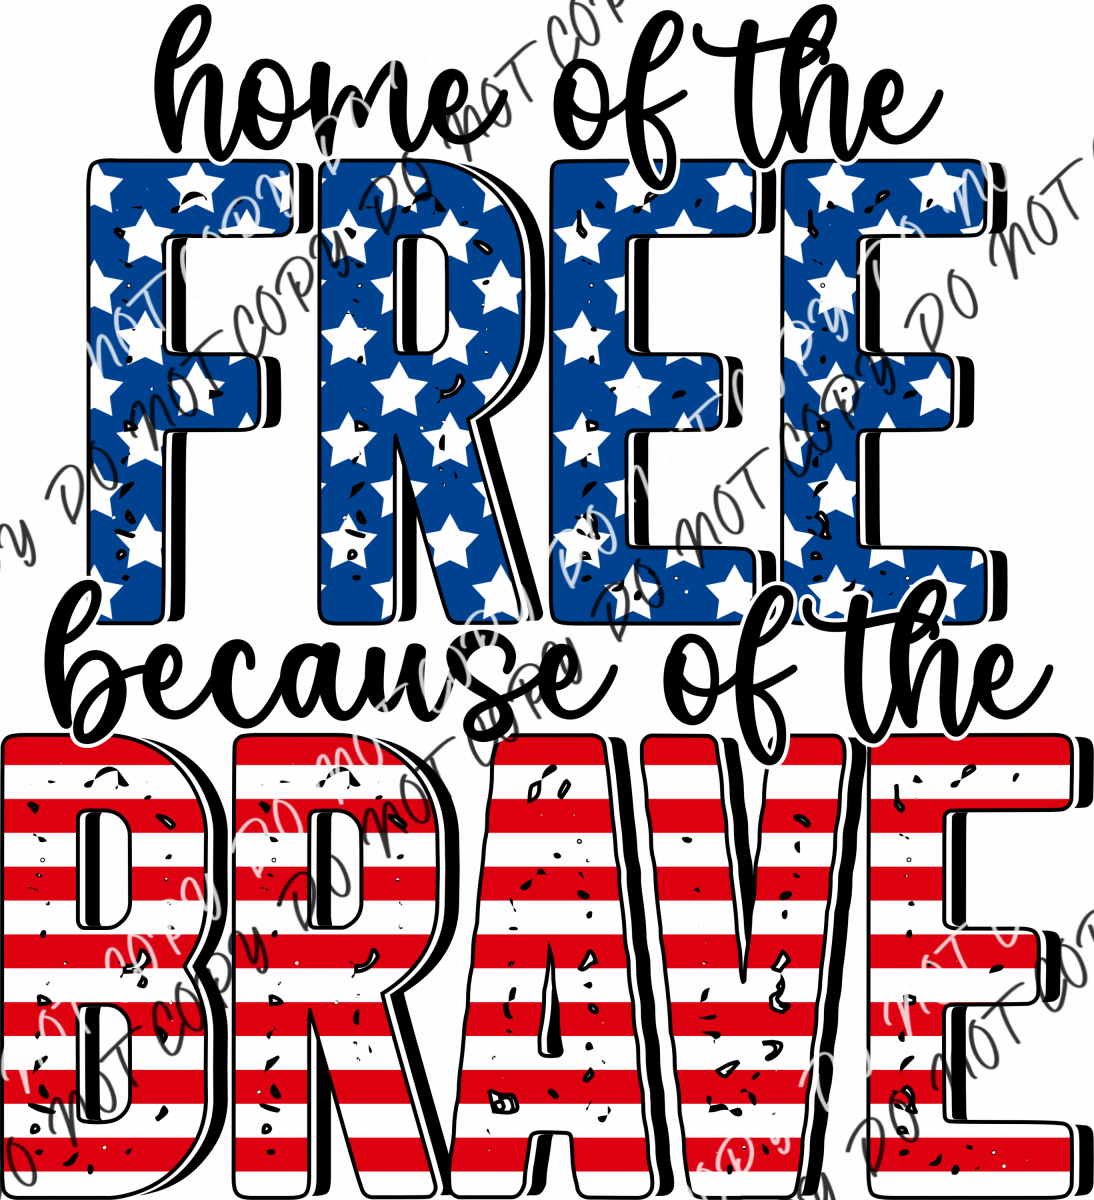 Home Of The Free Because Brave Dtf Transfer